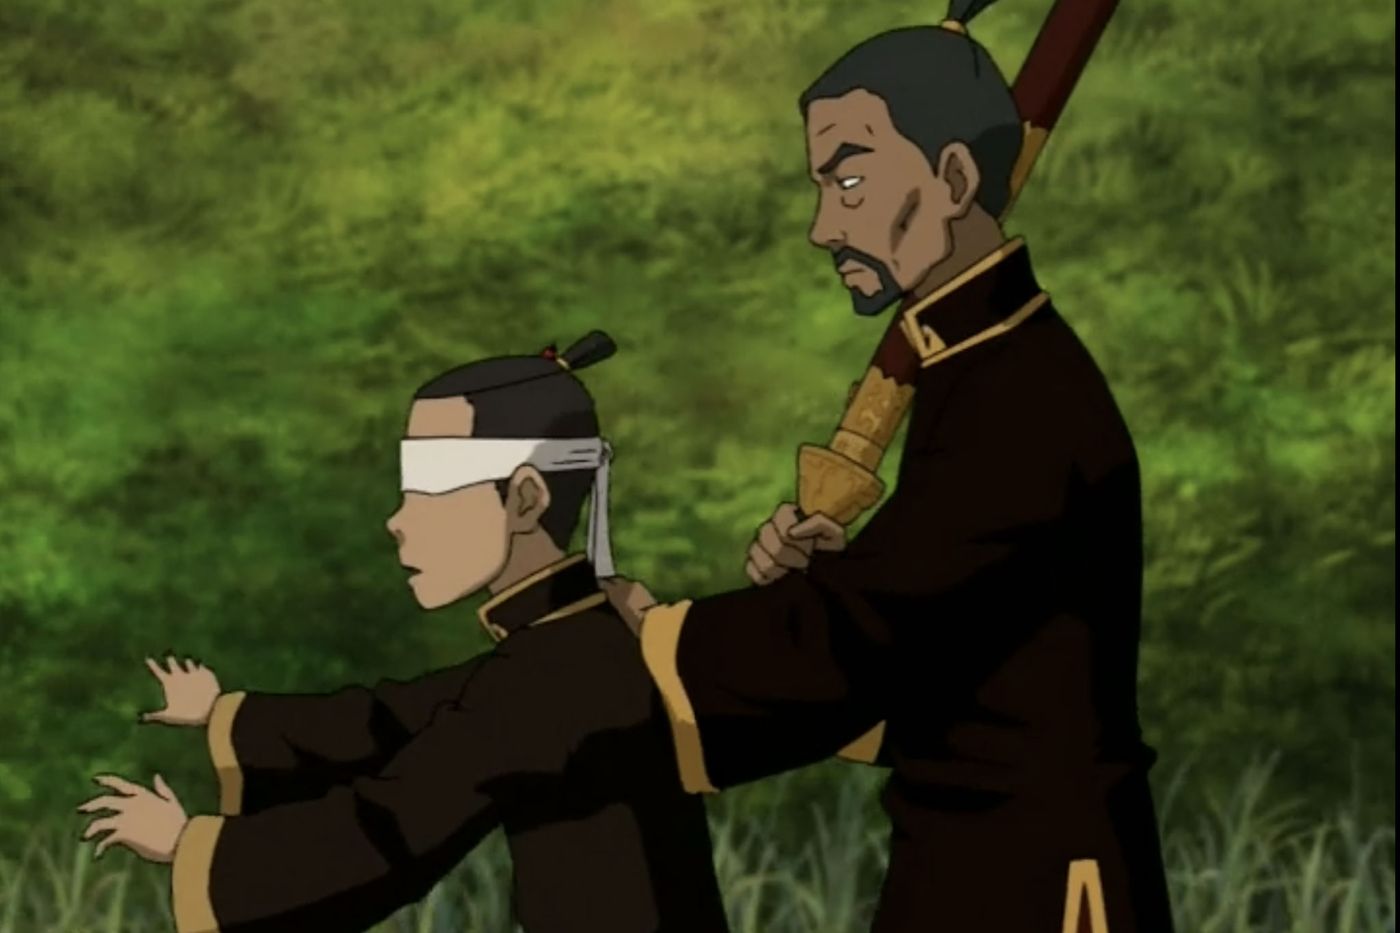 18 Side Characters In 'Avatar: The Last Airbender' That Deserve A Backstory